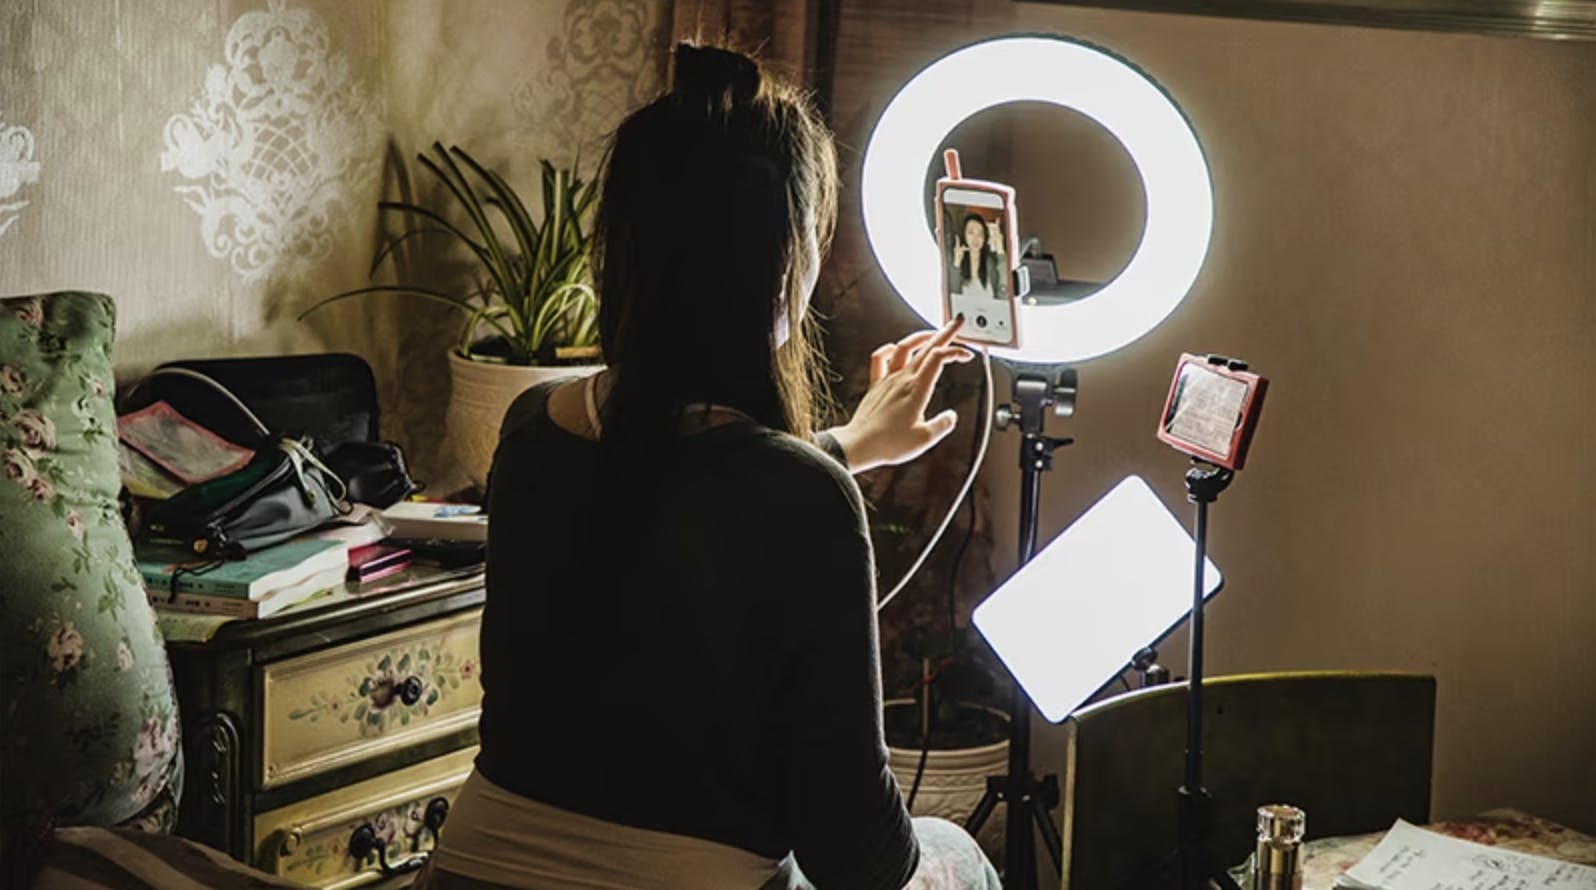 Image of a woman filming content for social media with a ring light